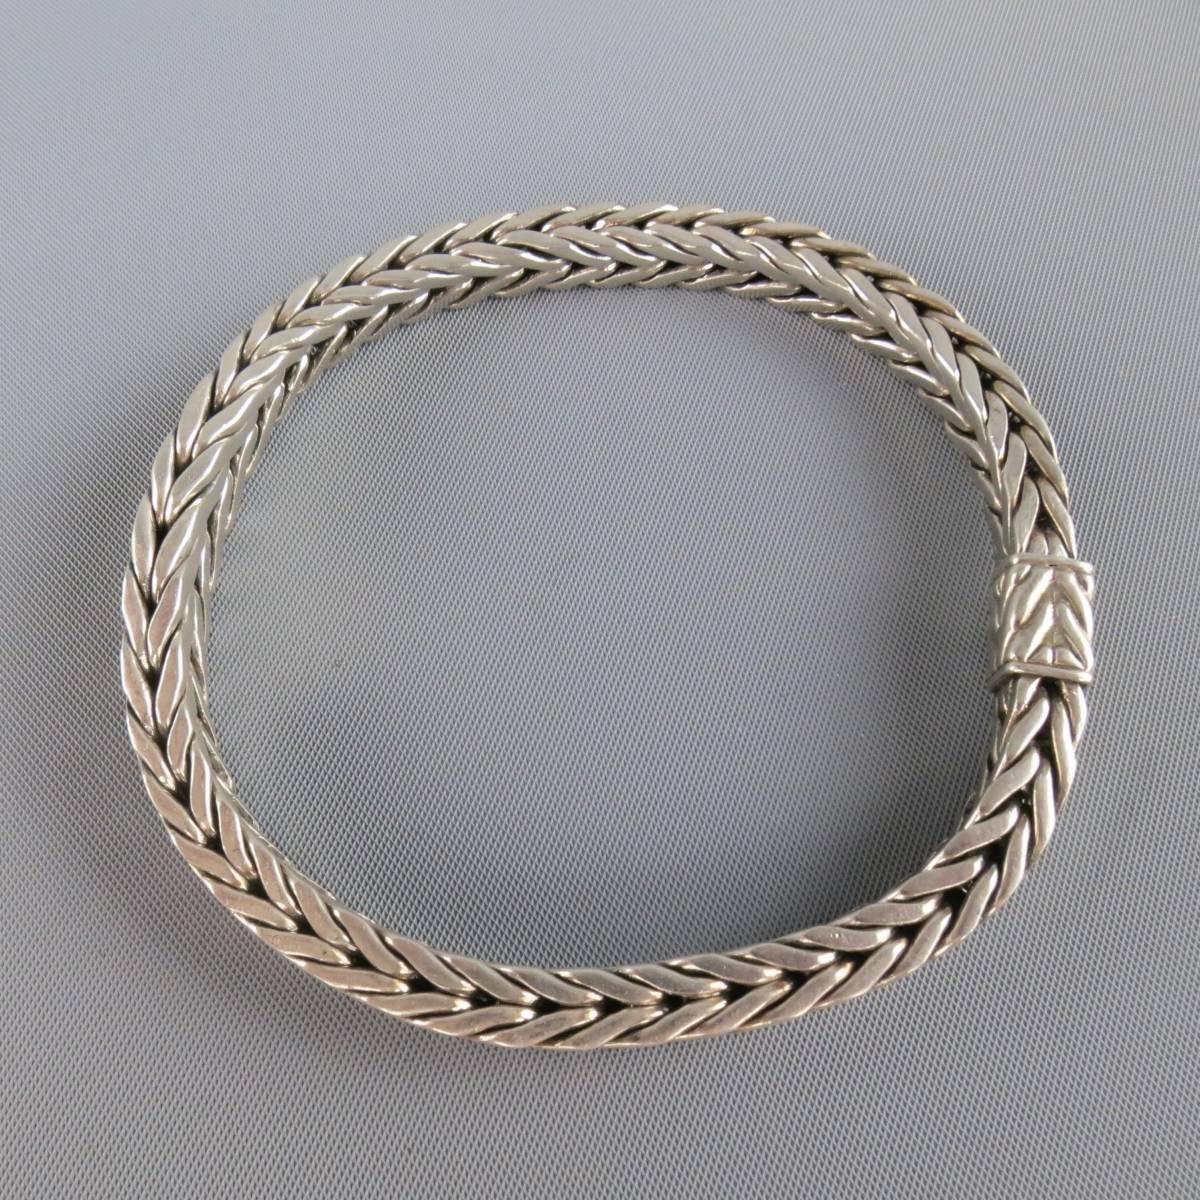 JOHN HARDY bracelet features a thick tapered braided sterling silver snake chain band with box closure.
 
Excellent Pre-Owned Condition.
 
Length: 23 cm.
Width: 1 cm.


Web ID: 82640 
